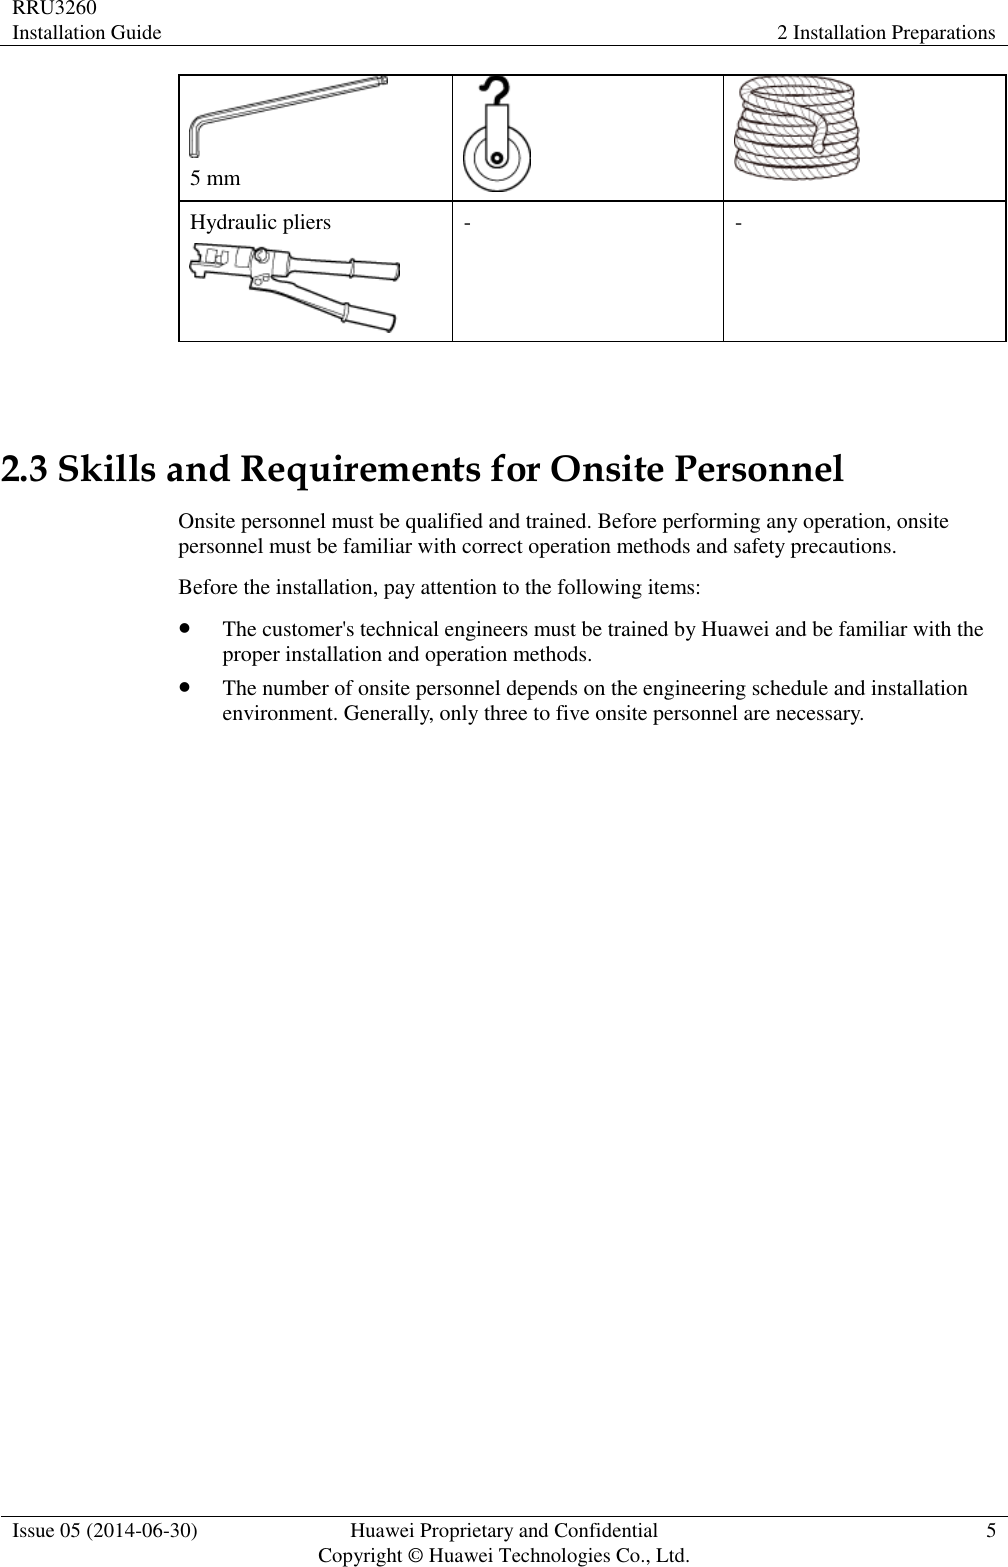 RRU3260 Installation Guide 2 Installation Preparations  Issue 05 (2014-06-30) Huawei Proprietary and Confidential                                     Copyright © Huawei Technologies Co., Ltd. 5   5 mm   Hydraulic pliers  - -  2.3 Skills and Requirements for Onsite Personnel Onsite personnel must be qualified and trained. Before performing any operation, onsite personnel must be familiar with correct operation methods and safety precautions. Before the installation, pay attention to the following items:  The customer&apos;s technical engineers must be trained by Huawei and be familiar with the proper installation and operation methods.  The number of onsite personnel depends on the engineering schedule and installation environment. Generally, only three to five onsite personnel are necessary. 